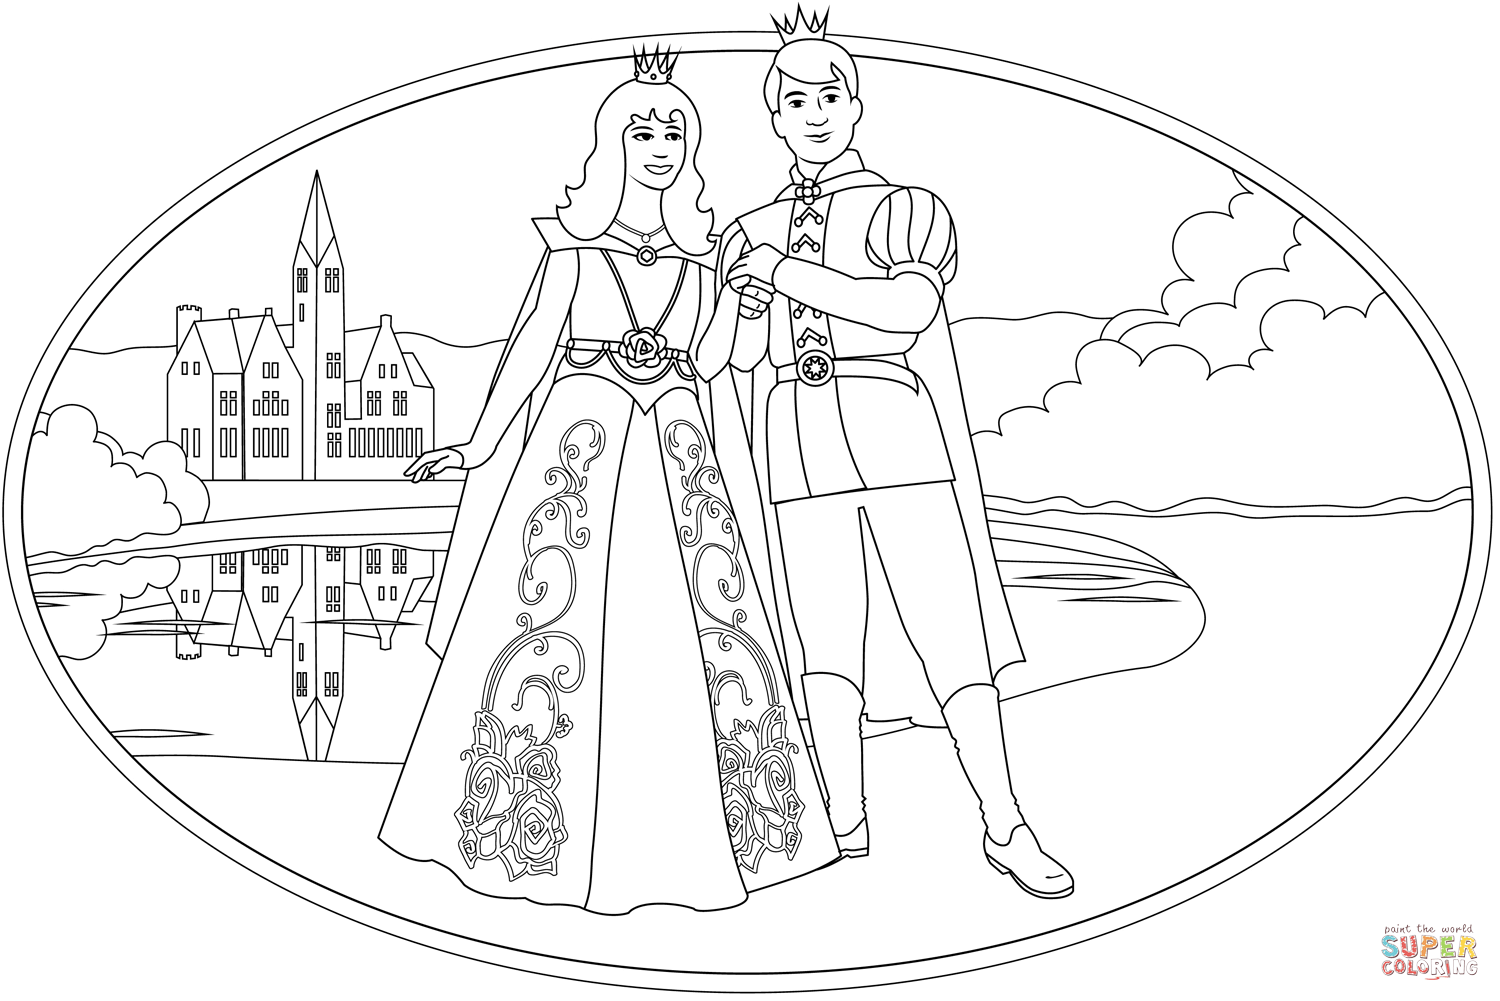 Prince and princess coloring page free printable coloring pages